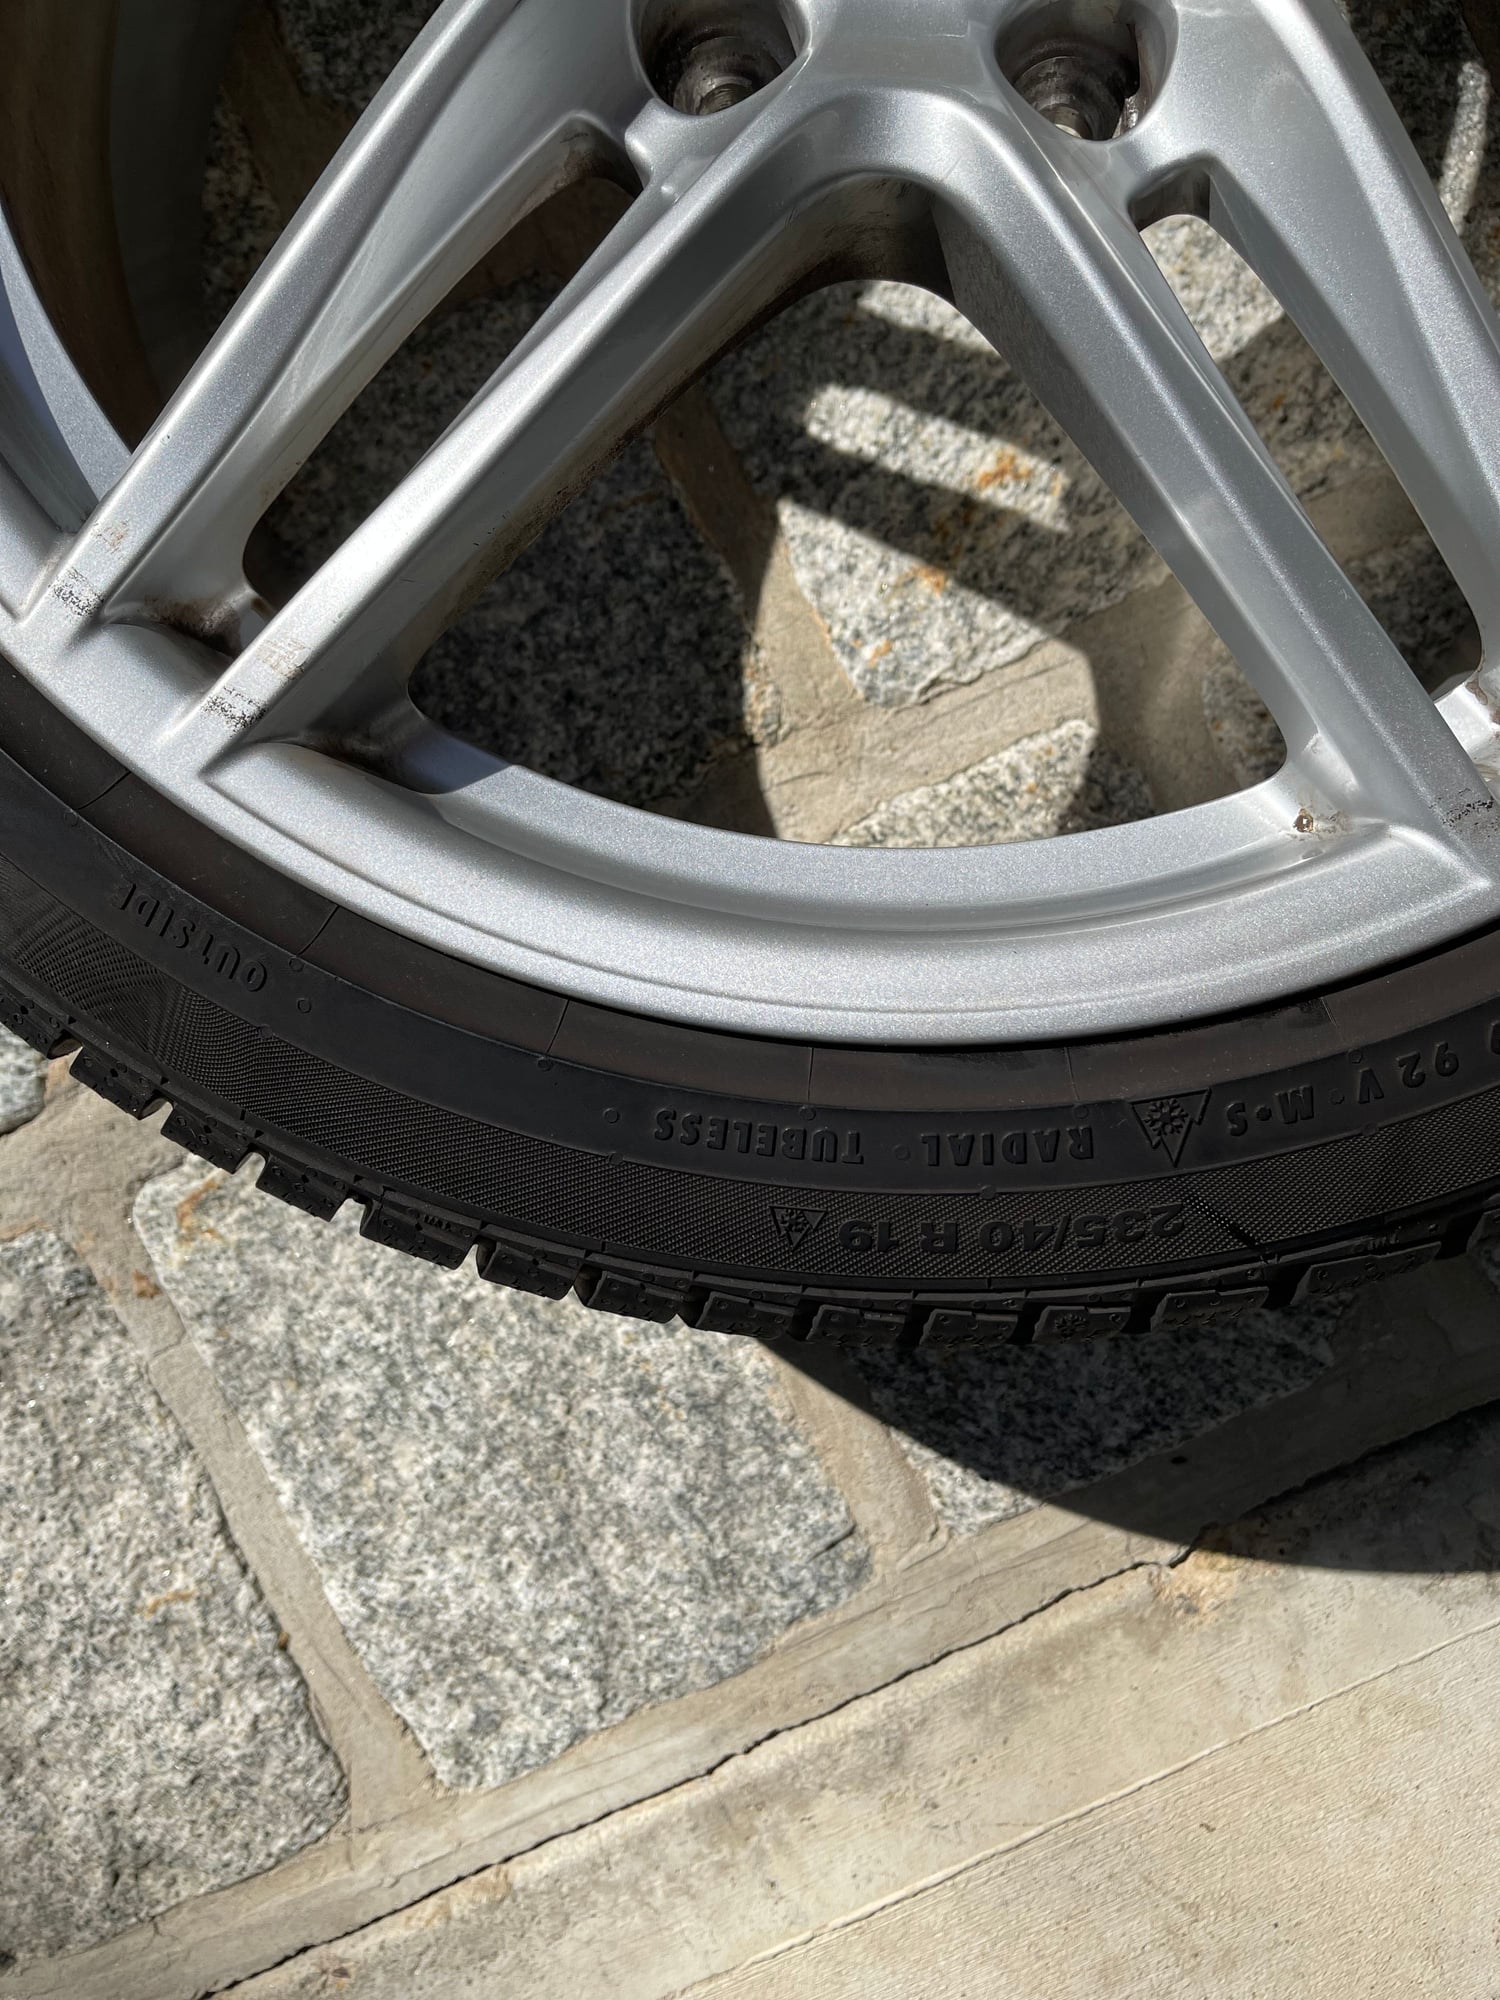 Wheels and Tires/Axles - 911 snow tires and rims - Used - 2012 to 2018 Porsche 911 - Franklin Lakes, NJ 07417, United States